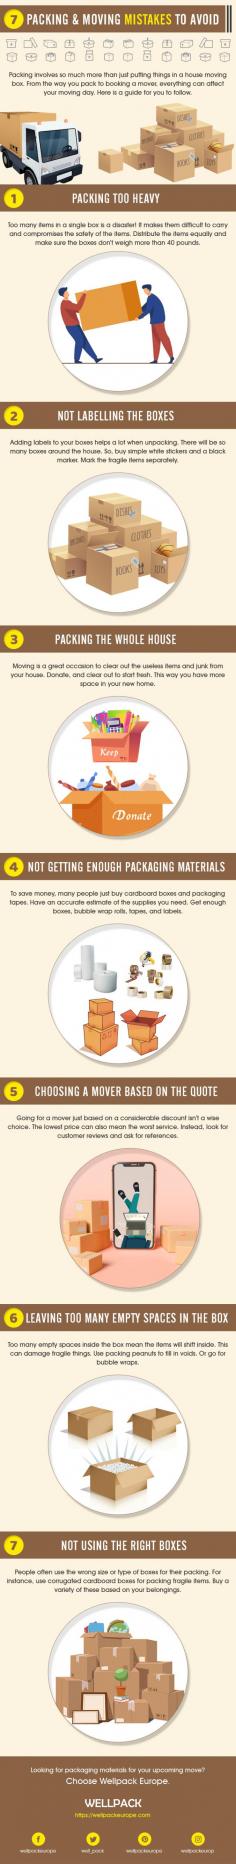 Packing an entire house can take a lot of time and hard work, so better start early. Combining and packing heavy items, knives, electronic appliances can get challenging at times. Be sure to protect your belongings with good-quality packaging materials. Buy supplies from a reputable company like Wellpack Europe. 